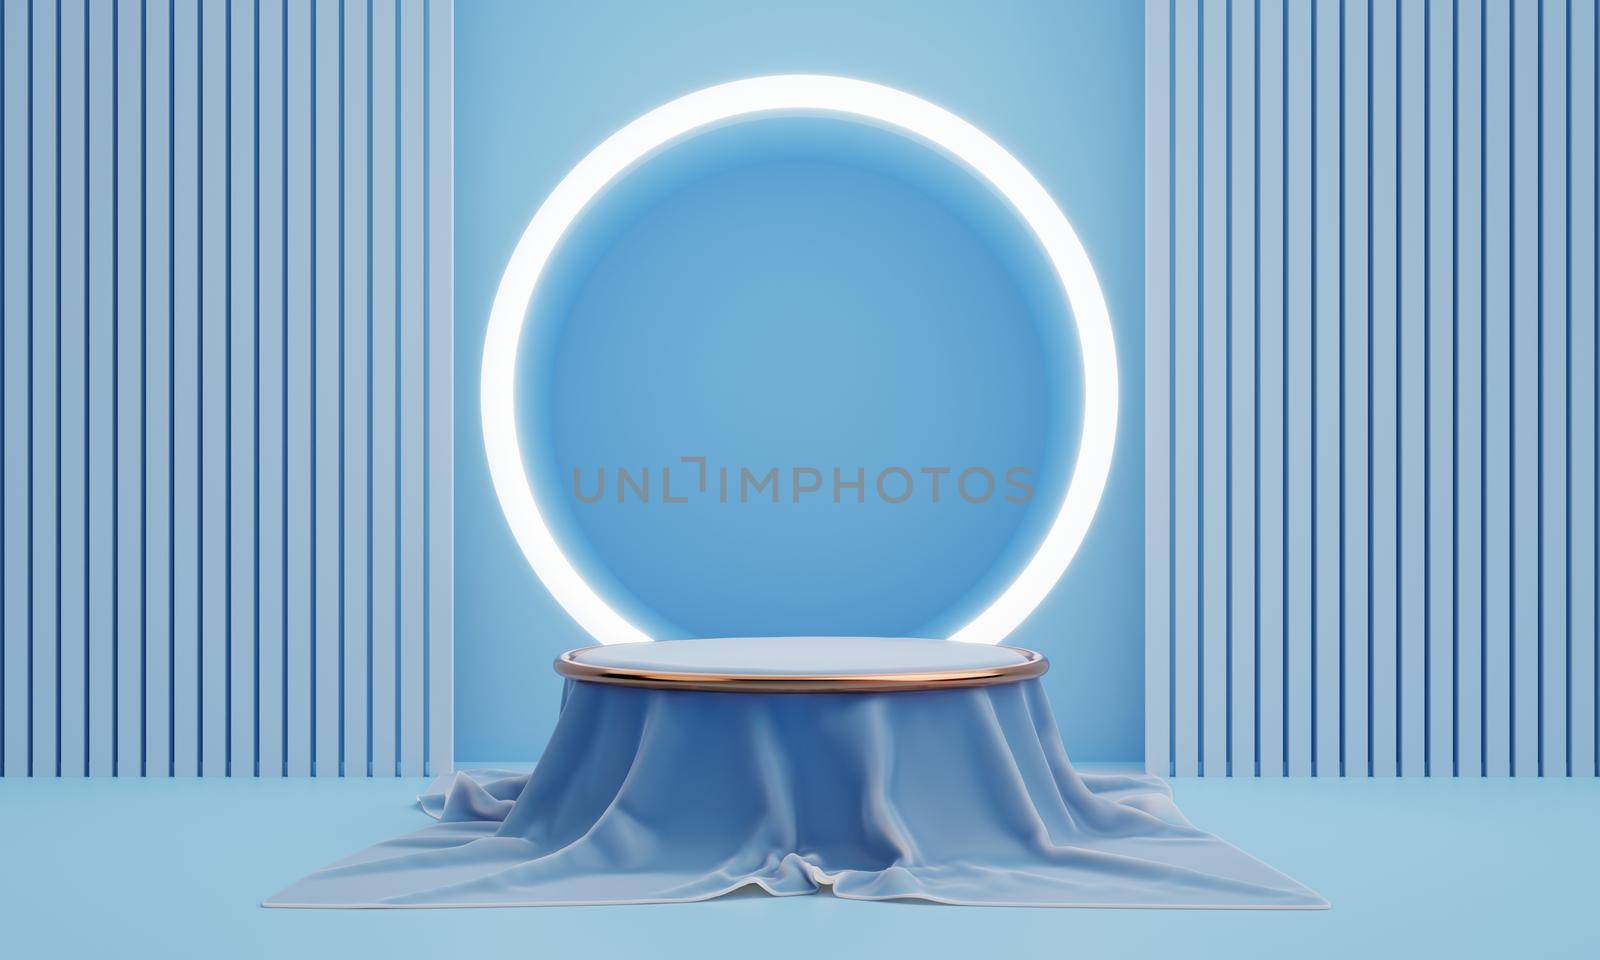 Minimal product podium stage in pastel blue color and geometric shape for presentation background. Abstract background and decoration scene element template concept. 3D illustration rendering by MiniStocker